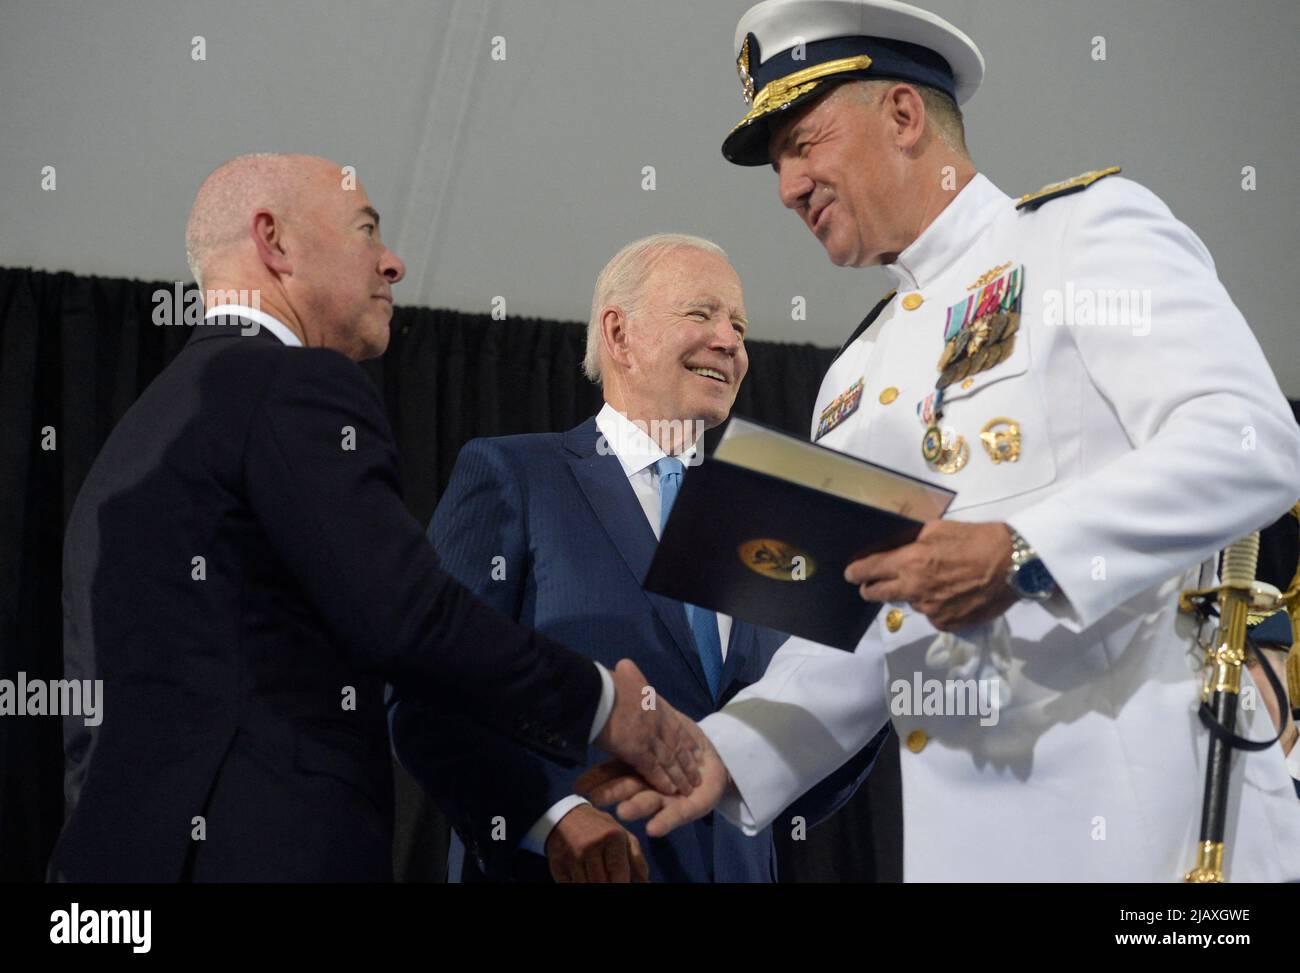 U.S. Coast Guard Adm. Karl L. Schultz shakes hand with President Joe Biden and Homeland Security Secretary Alejandro Mayorkas (L) during a change of command ceremony at Coast Guard Headquarters in Washington, DC on Wednesday, June 1, 2022. Coast Guard Adm. Linda Fagan is taking over command from Schultz. Photo by Bonnie Cash/Pool/ABACAPRESS.COM Stock Photo